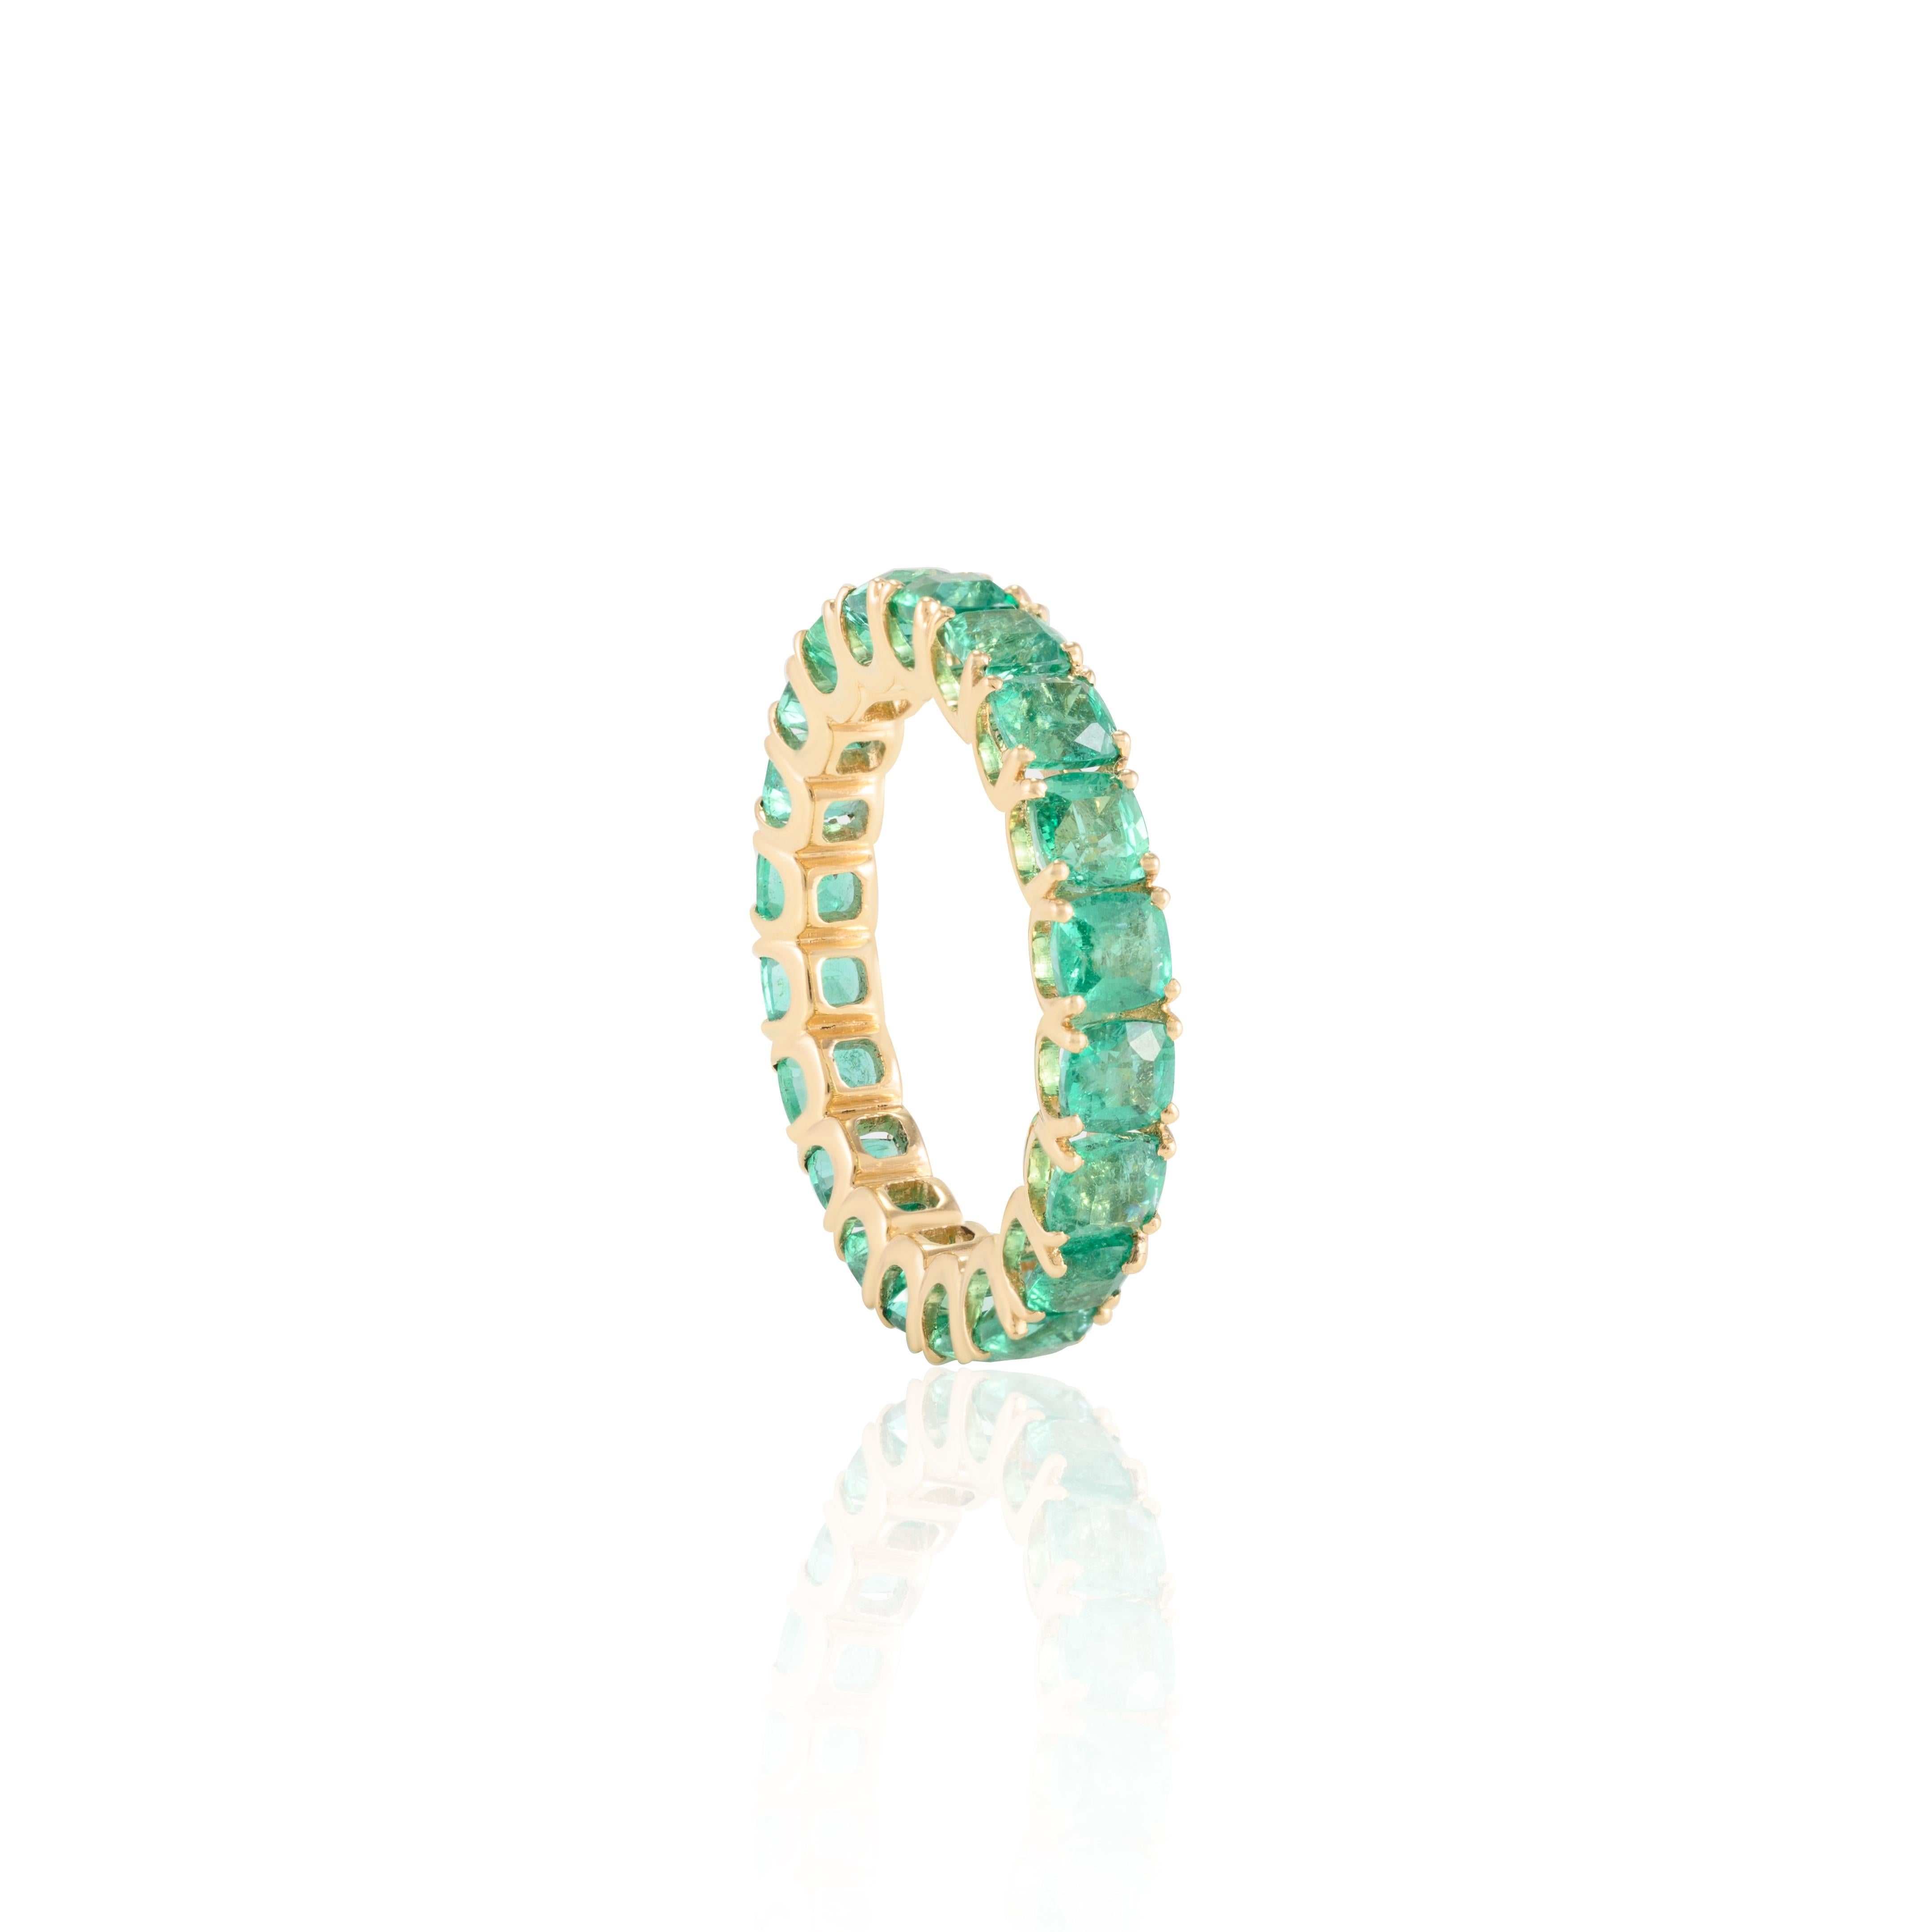 For Sale:  18k Solid Yellow Gold 4.06 CTW Cushion Emerald Eternity Band Ring 6